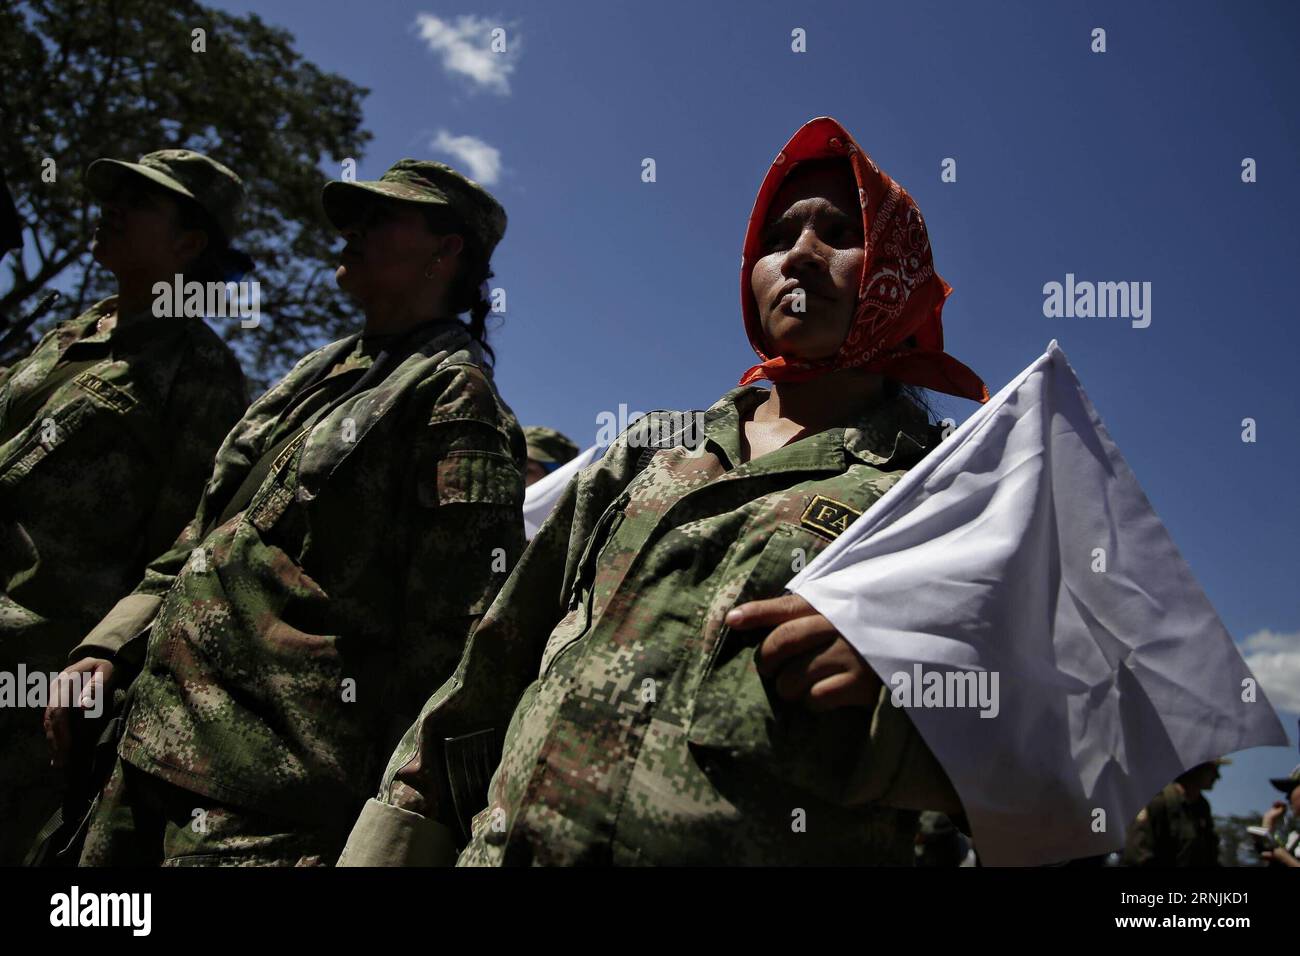 (170202) -- PONDORES, Feb. 1, 2017 -- Women of the Caribbean bloc of the Revolutionary Armed Forces of Colombia (FARC) stand in the transition zone in Pondores, La Guajira department, Colombia, on Feb. 1, 2017. Colombia s FARC rebels have begun their final march towards designated transition zones, where they will lay down their weapons as part of a peace deal reached with the government, local media reported. Luisa Gonzalez/COLPRENSA) (da) (fnc) (cl) MANDATORY CREDIT NO SALES-NO ARCHIVE EDITORIAL USE ONLY COLOMBIA OUT COLOMBIA-PONDORES-POLITICS-FARC e COLPRENSA PUBLICATIONxNOTxINxCHN   Feb 1 Stock Photo